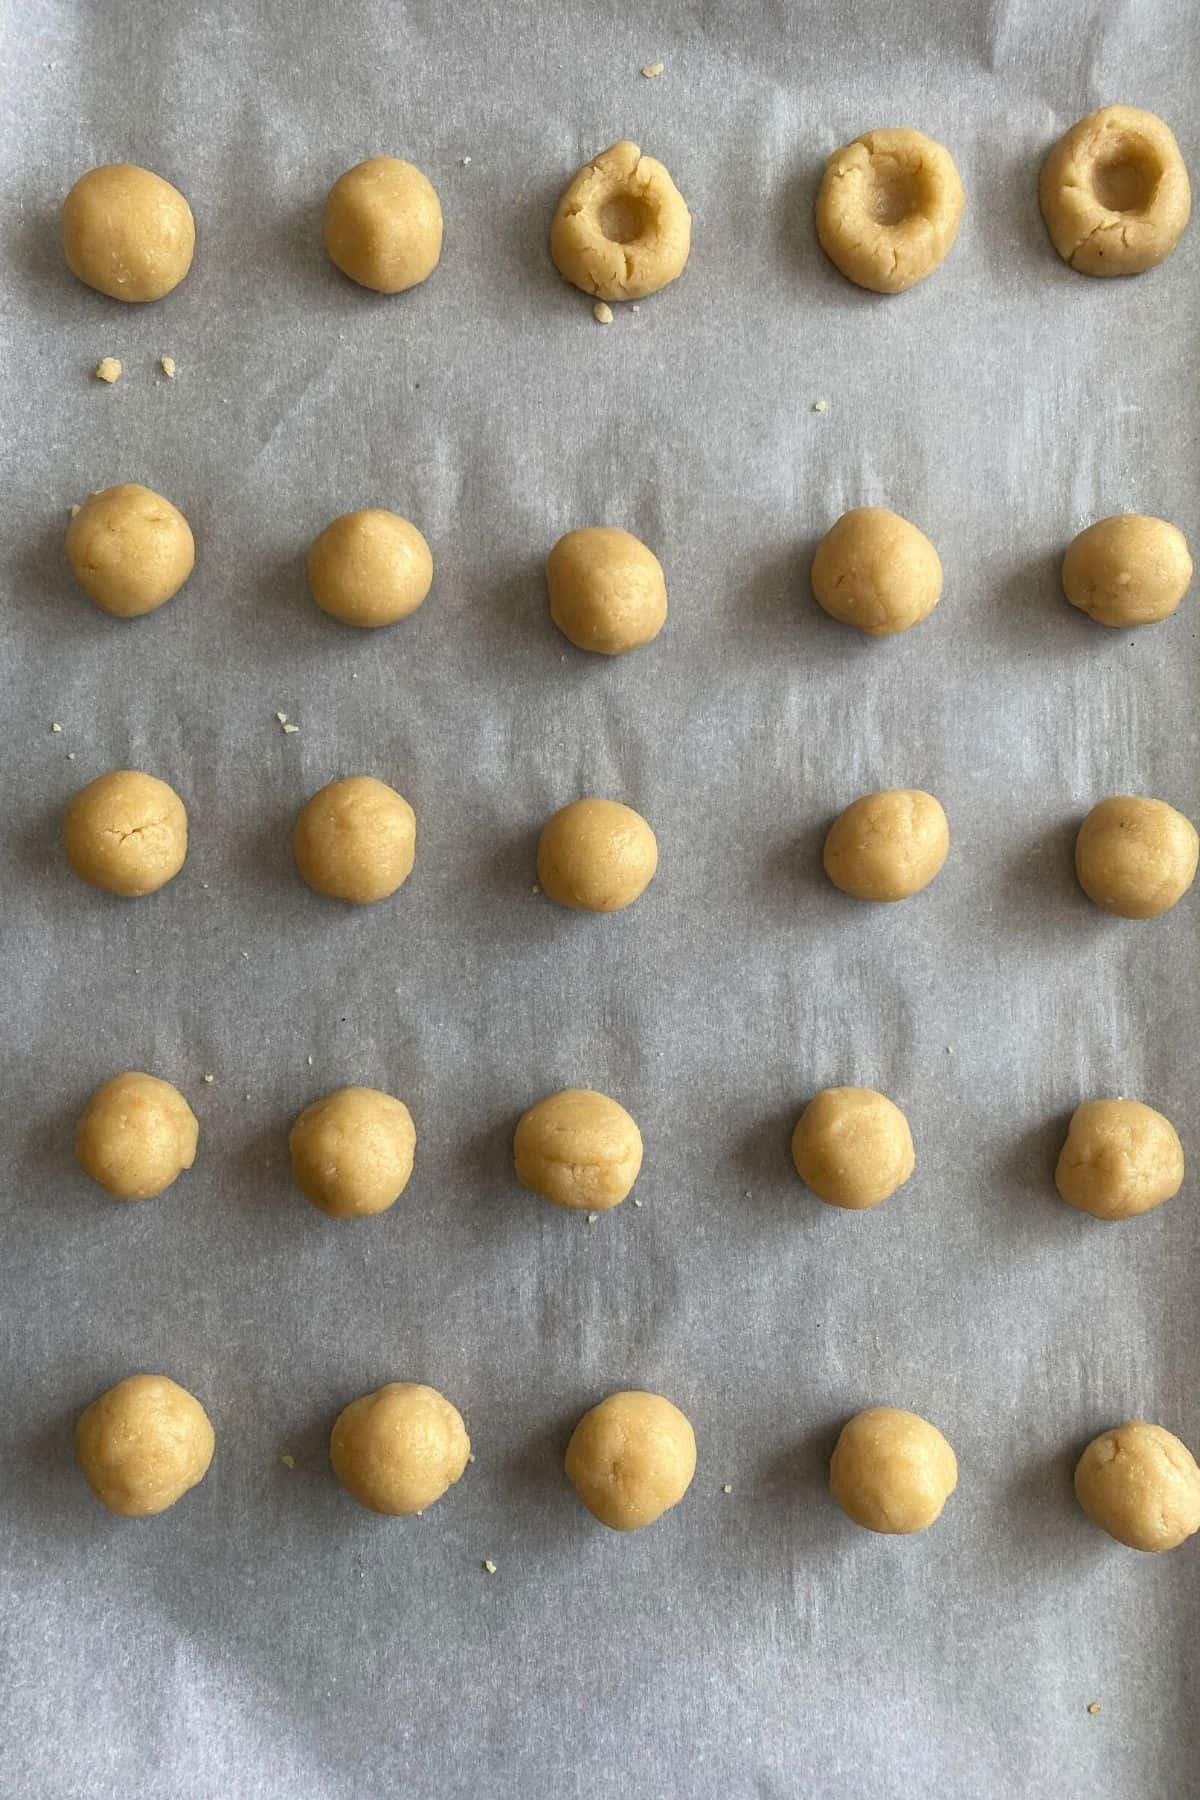 Thumbprint cookie dough balls with three with thumbprints in them